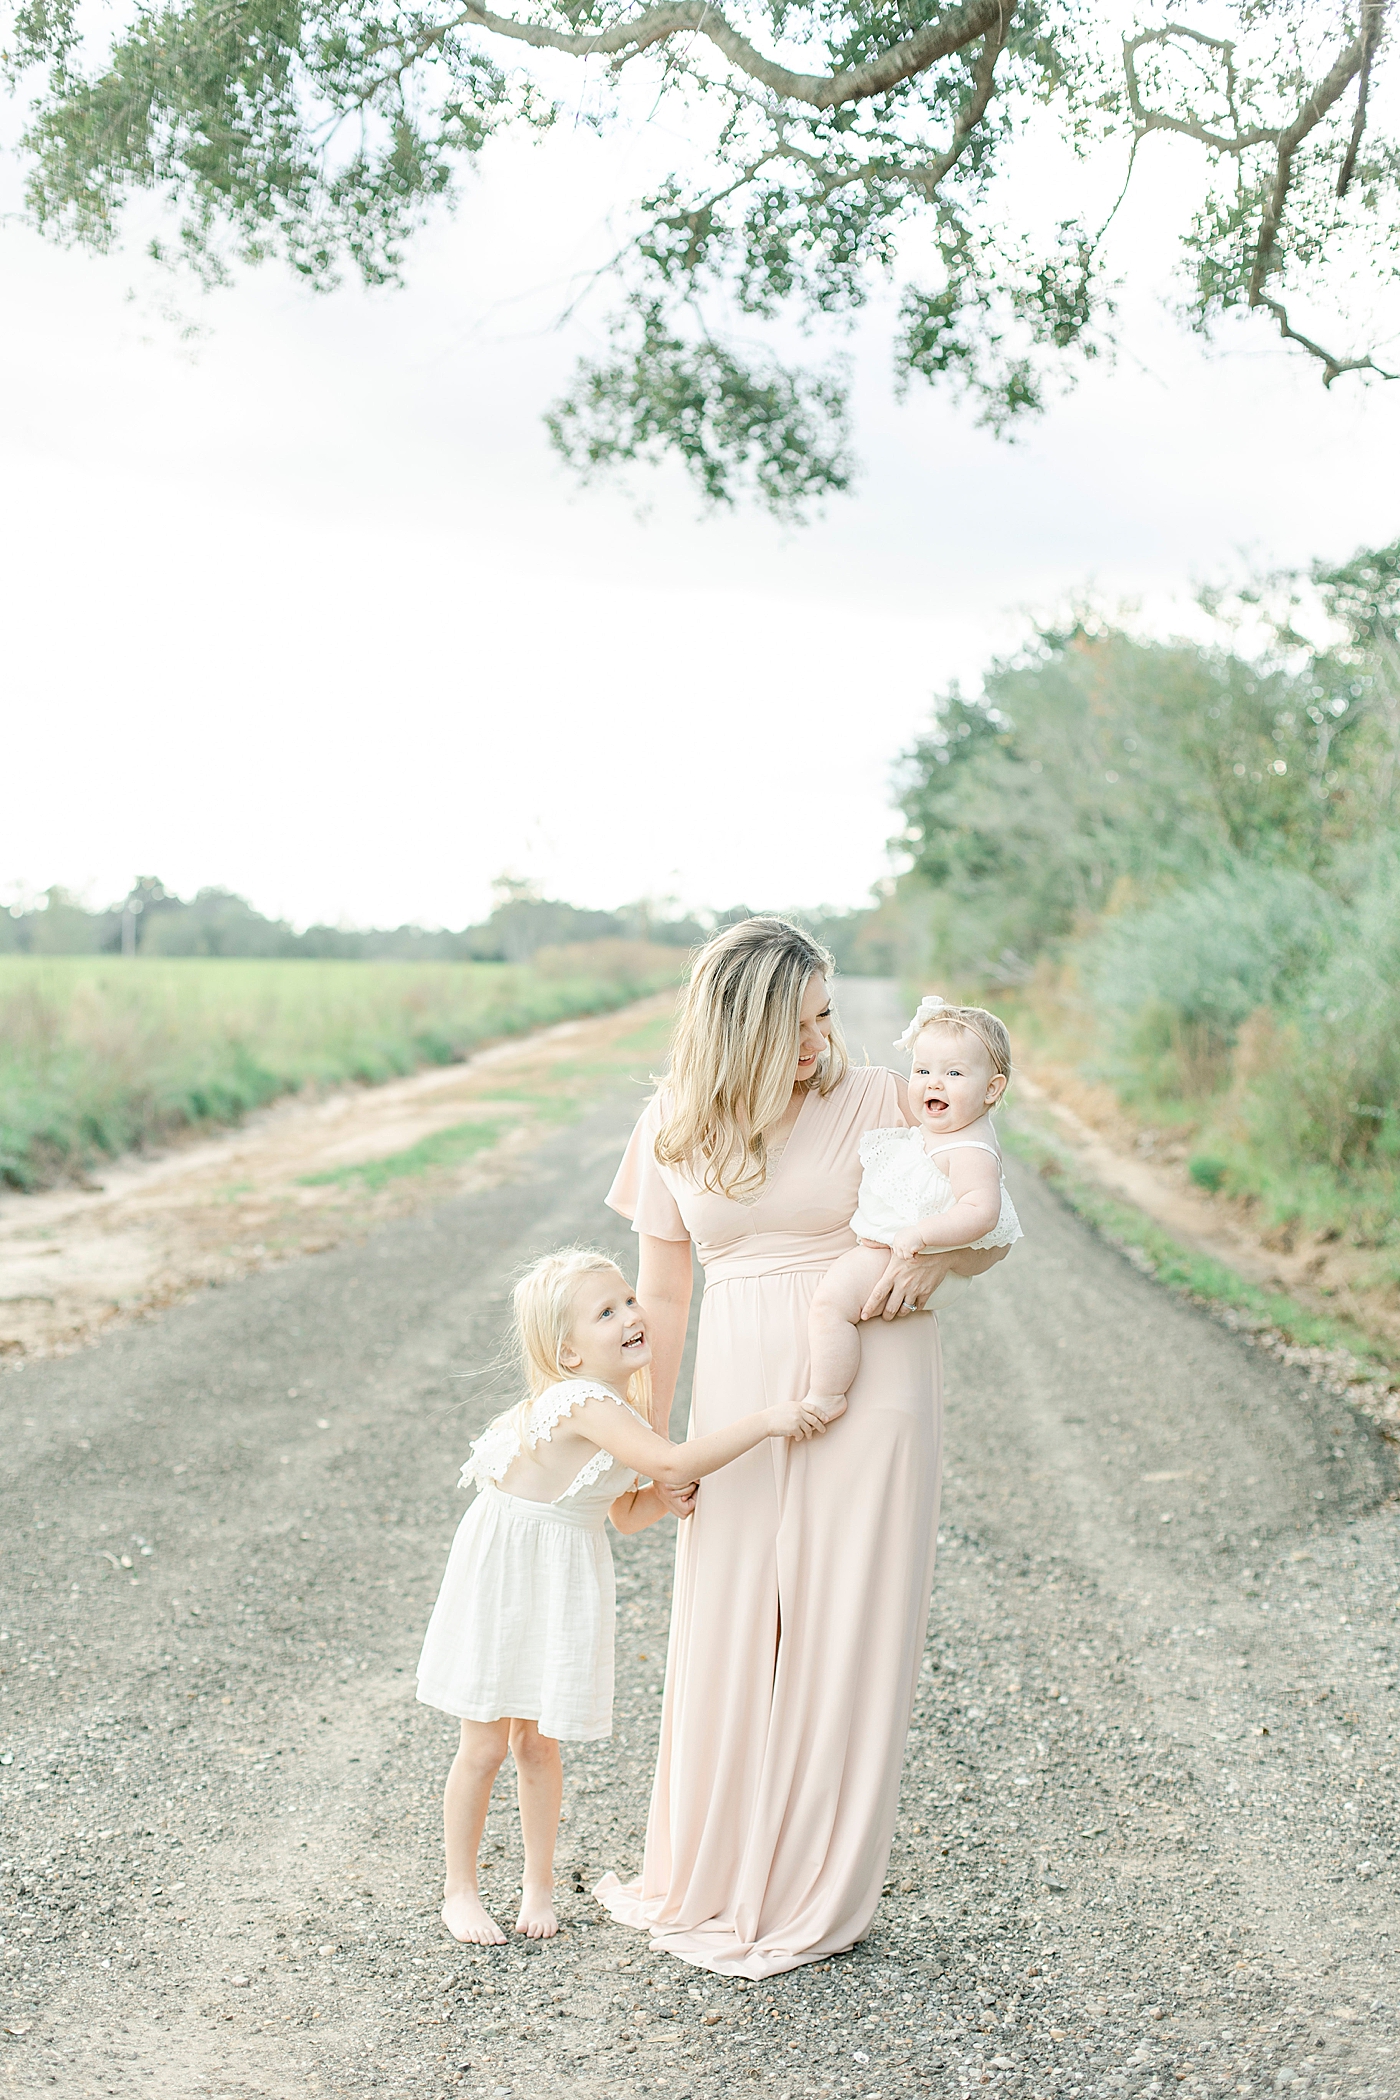 Mom interacting with her two daughters | Photo by Hattiesburg MS family photographer Little Sunshine Photography 